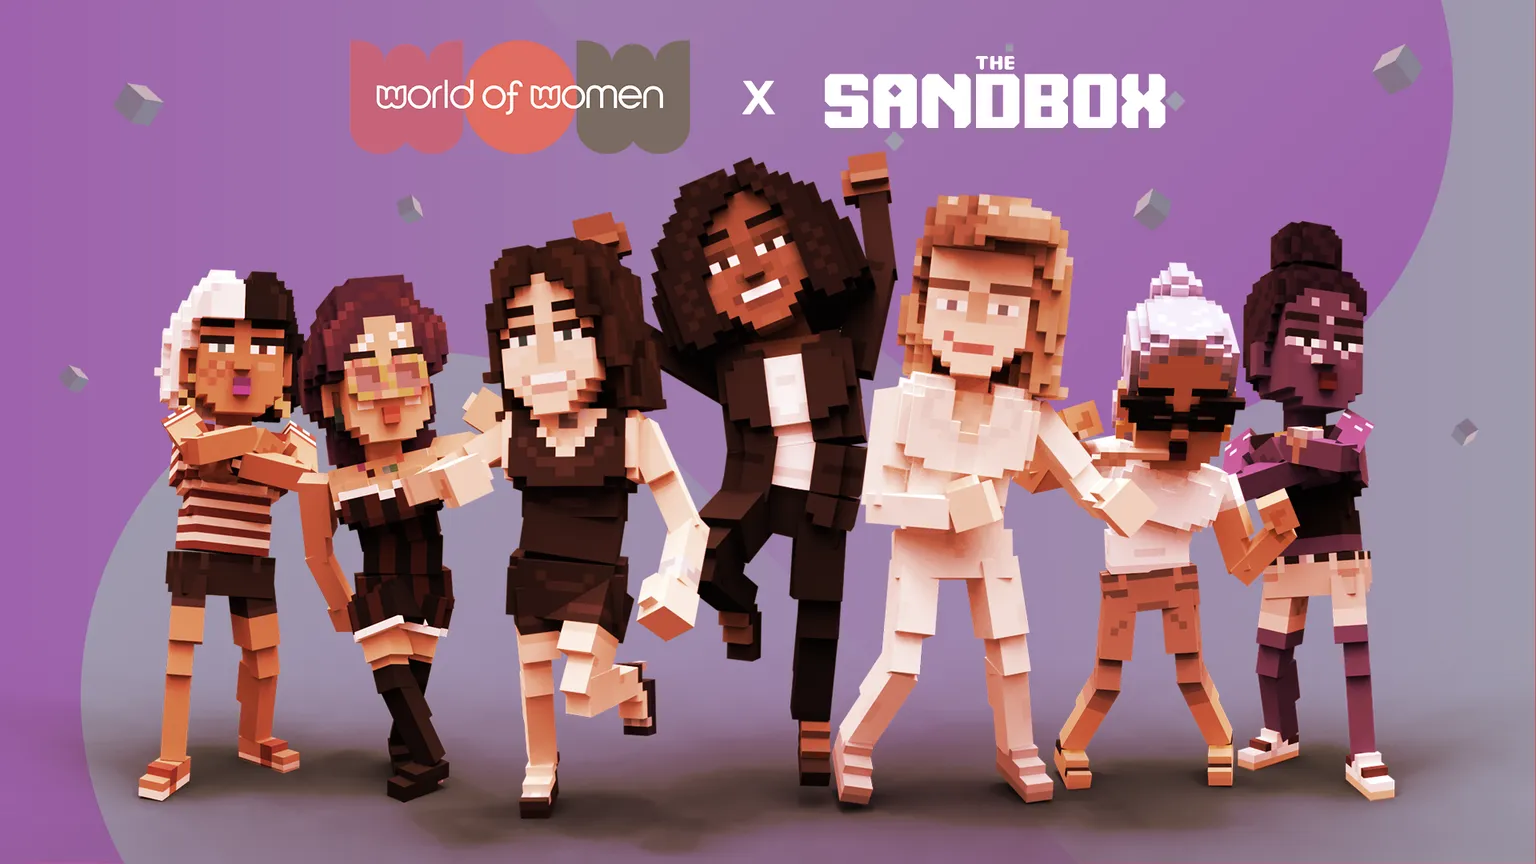 The Sandbox and World of Women are teaming up. Image: The Sandbox